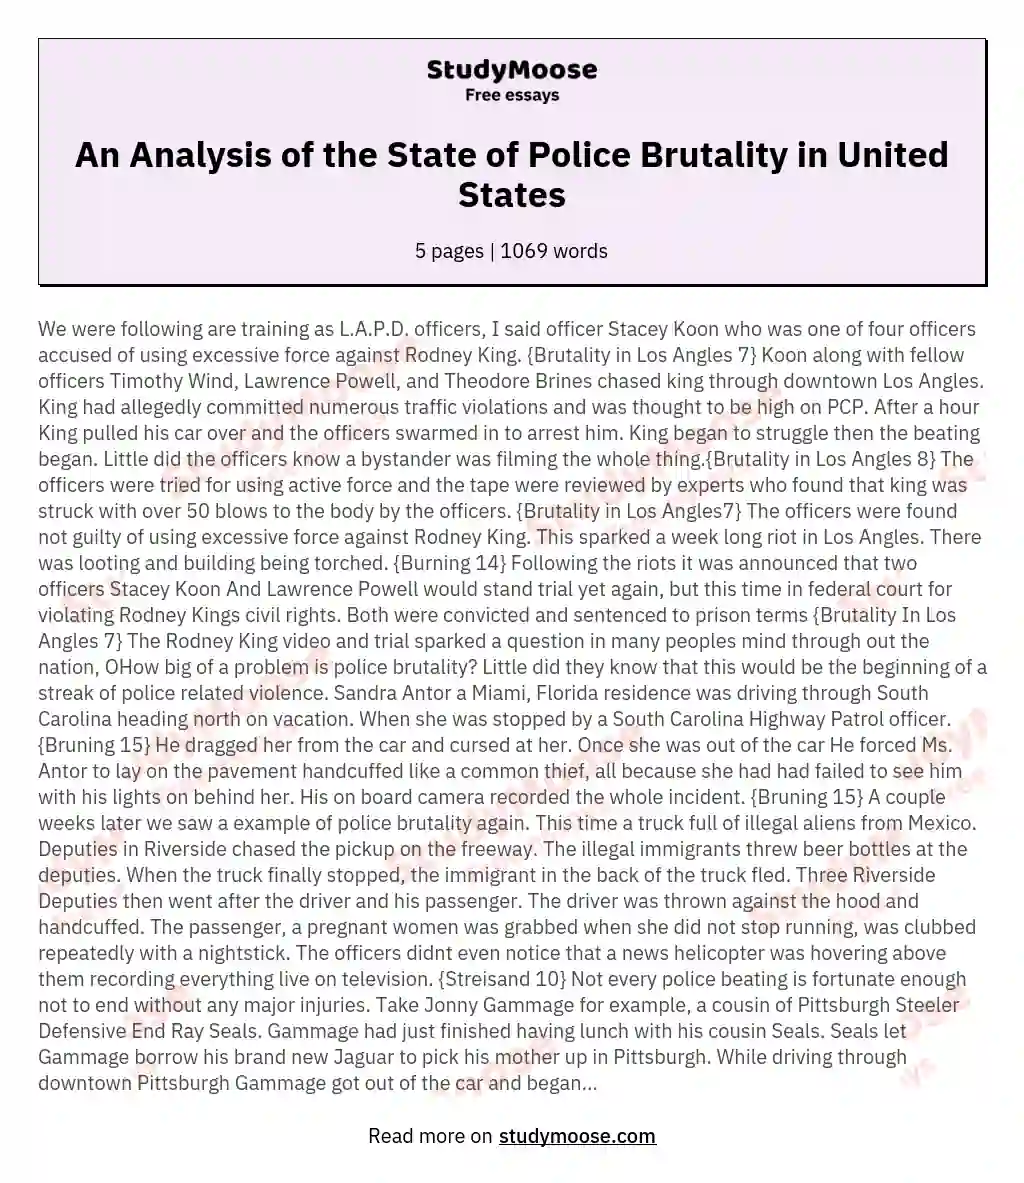 An Analysis of the State of Police Brutality in United States essay